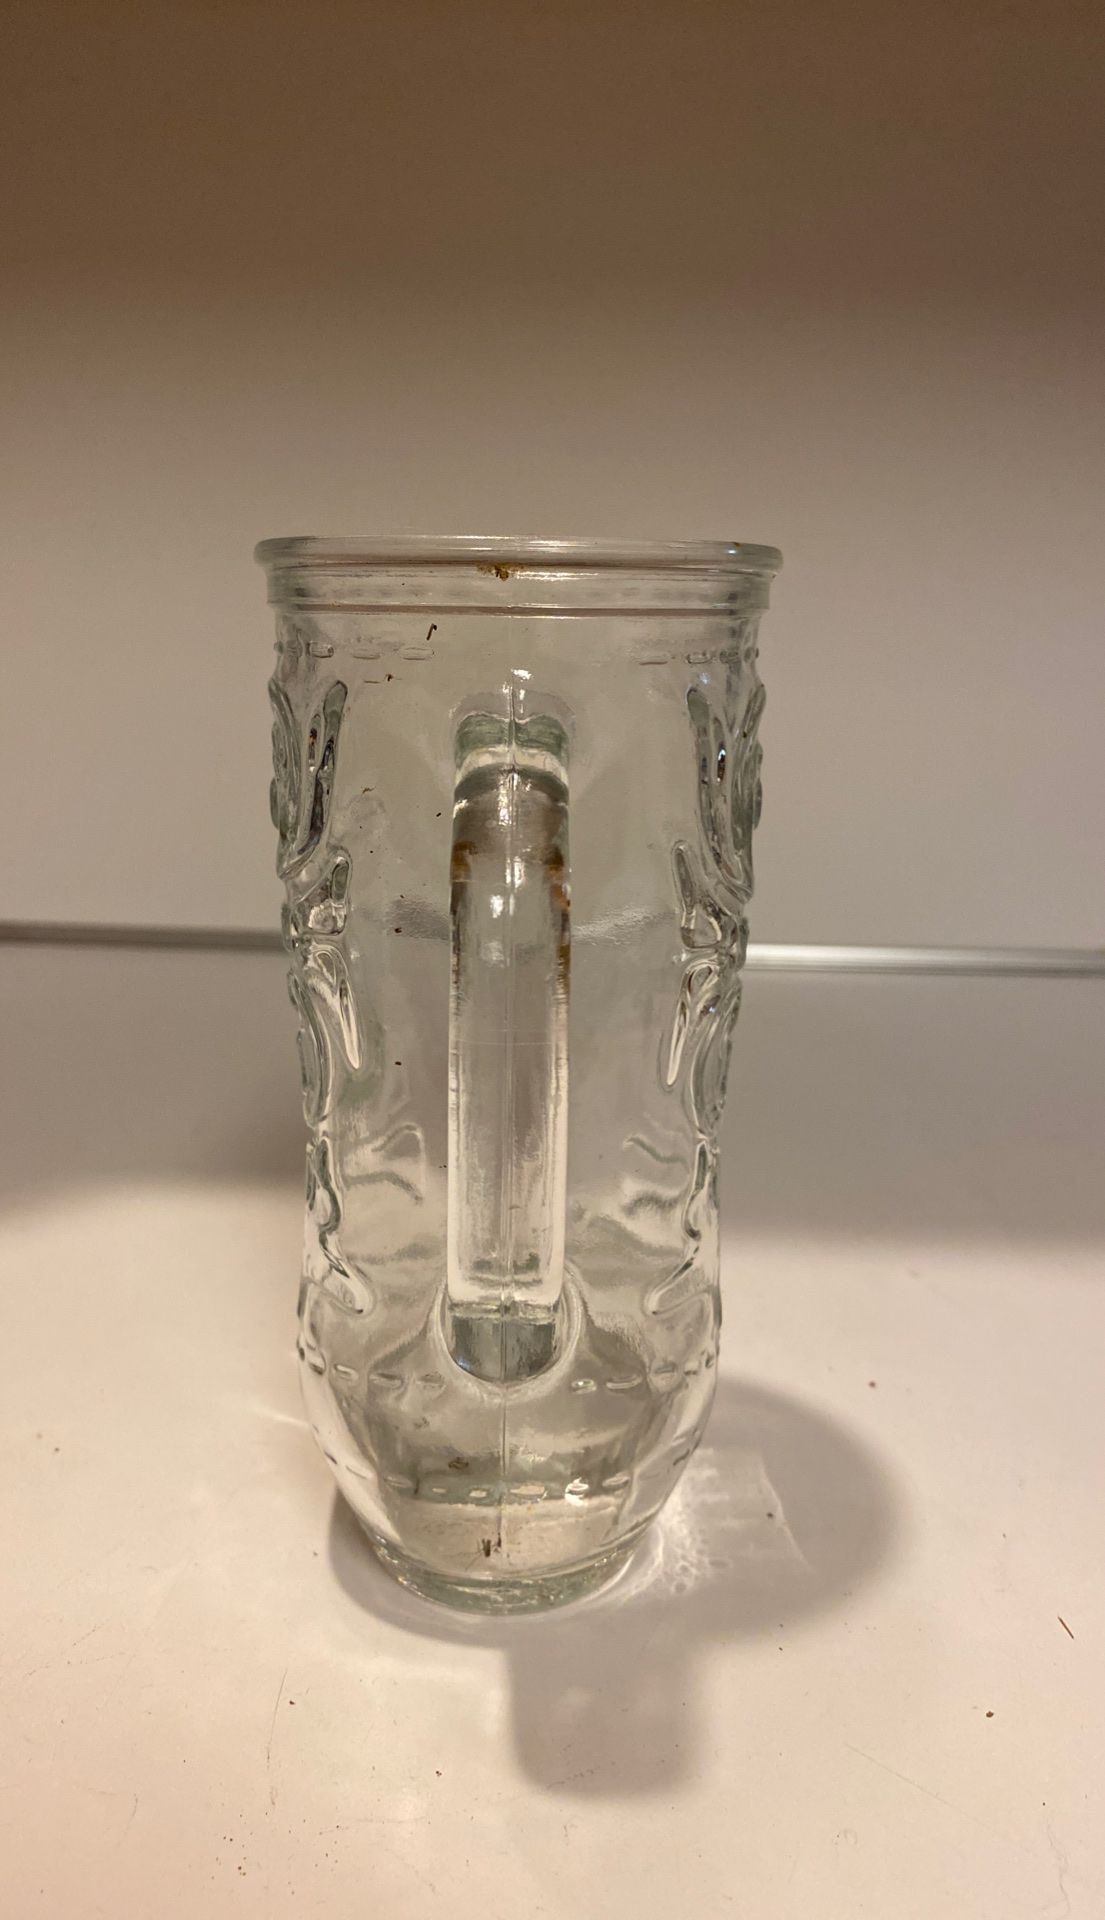 Clear cowboy boot glass